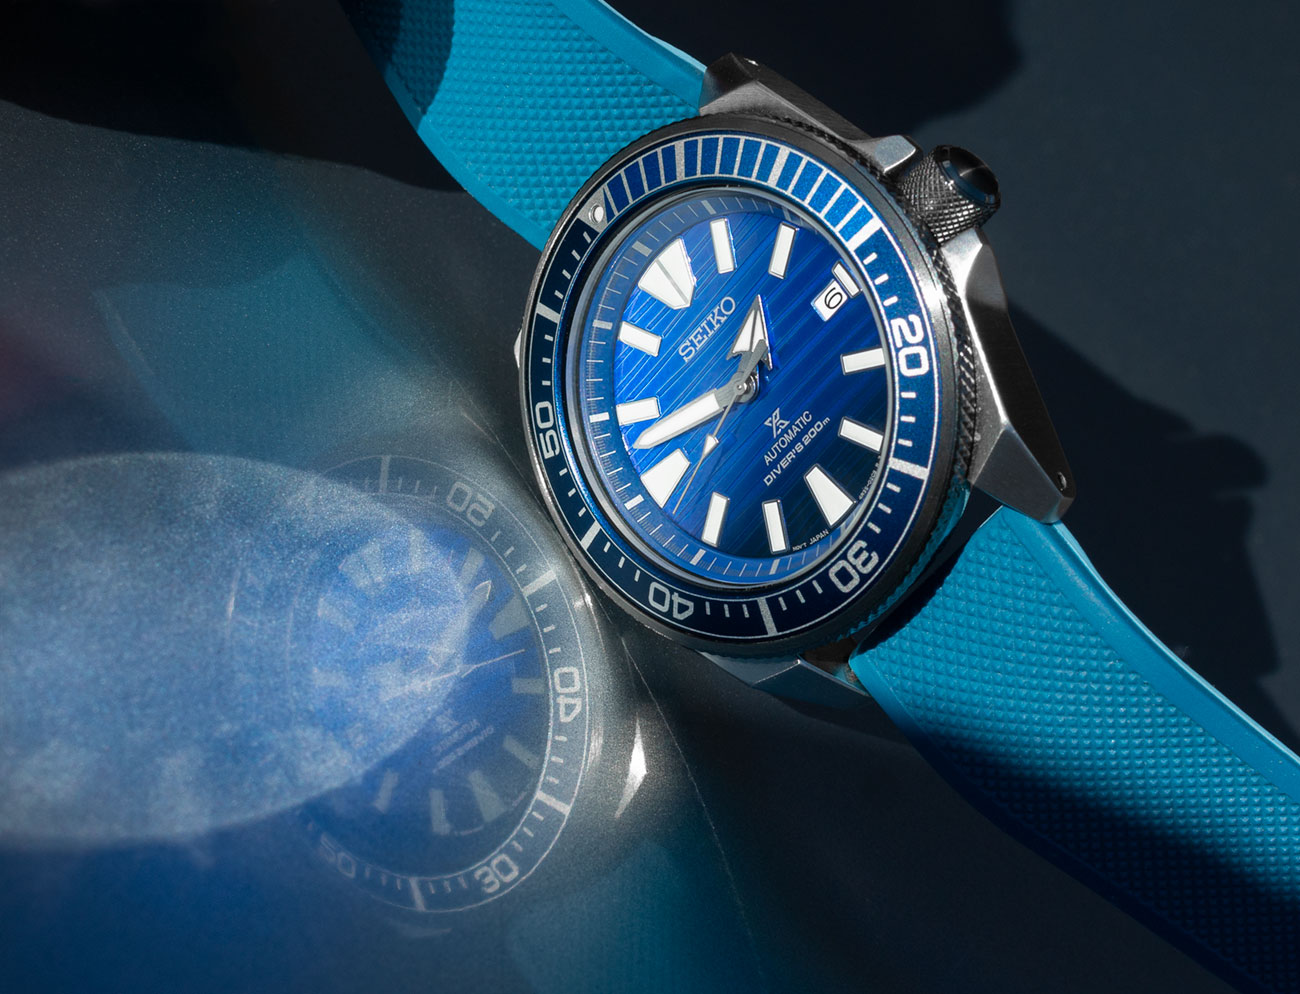 Seiko Prospex SRPC93 'Save The Ocean' Samurai Dive Watch Review reflections